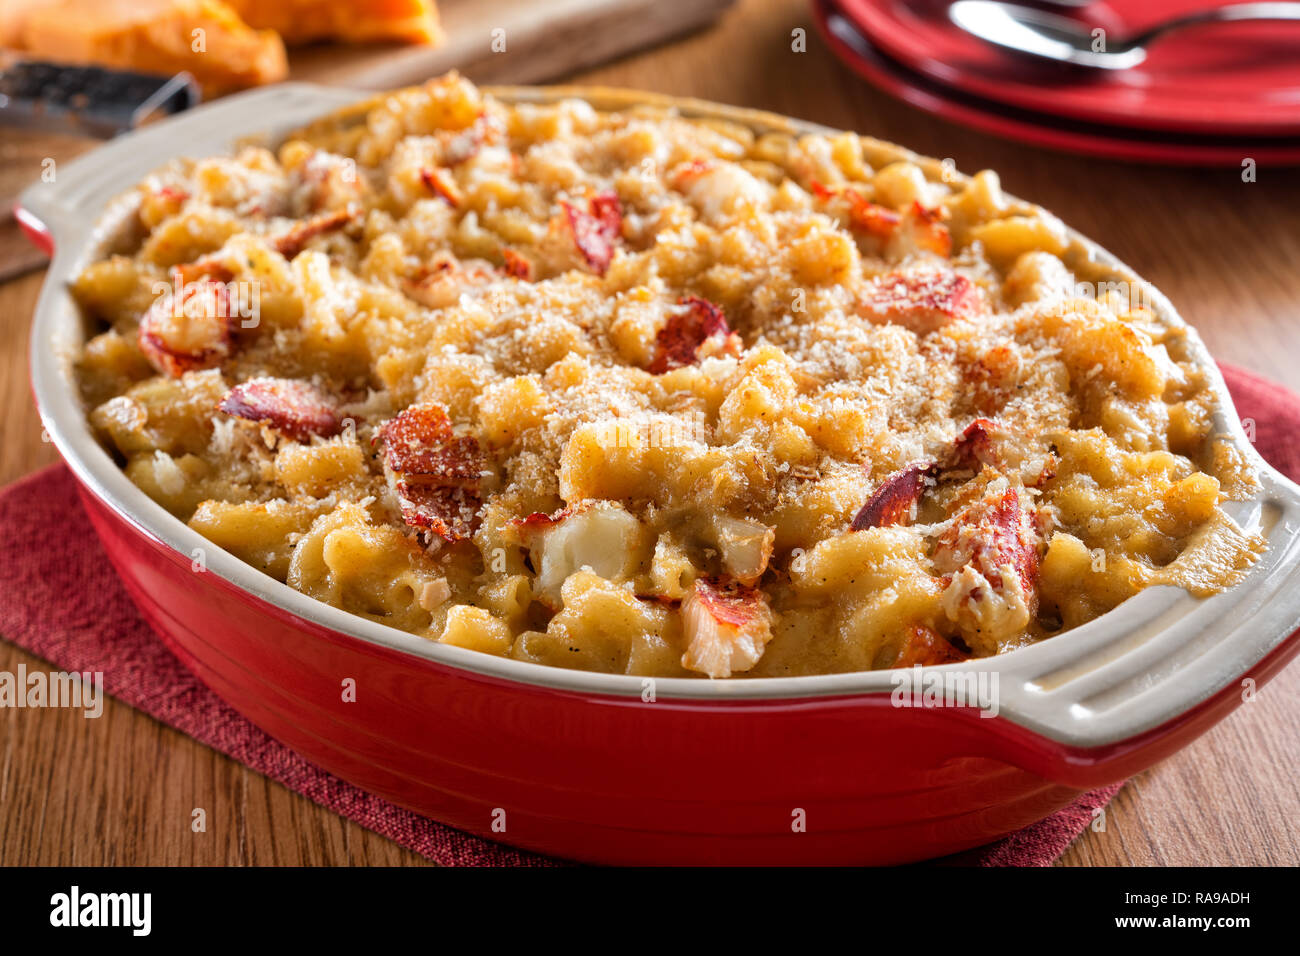 A delicious homemade lobster mac and cheese casserole on a wood table top. Stock Photo